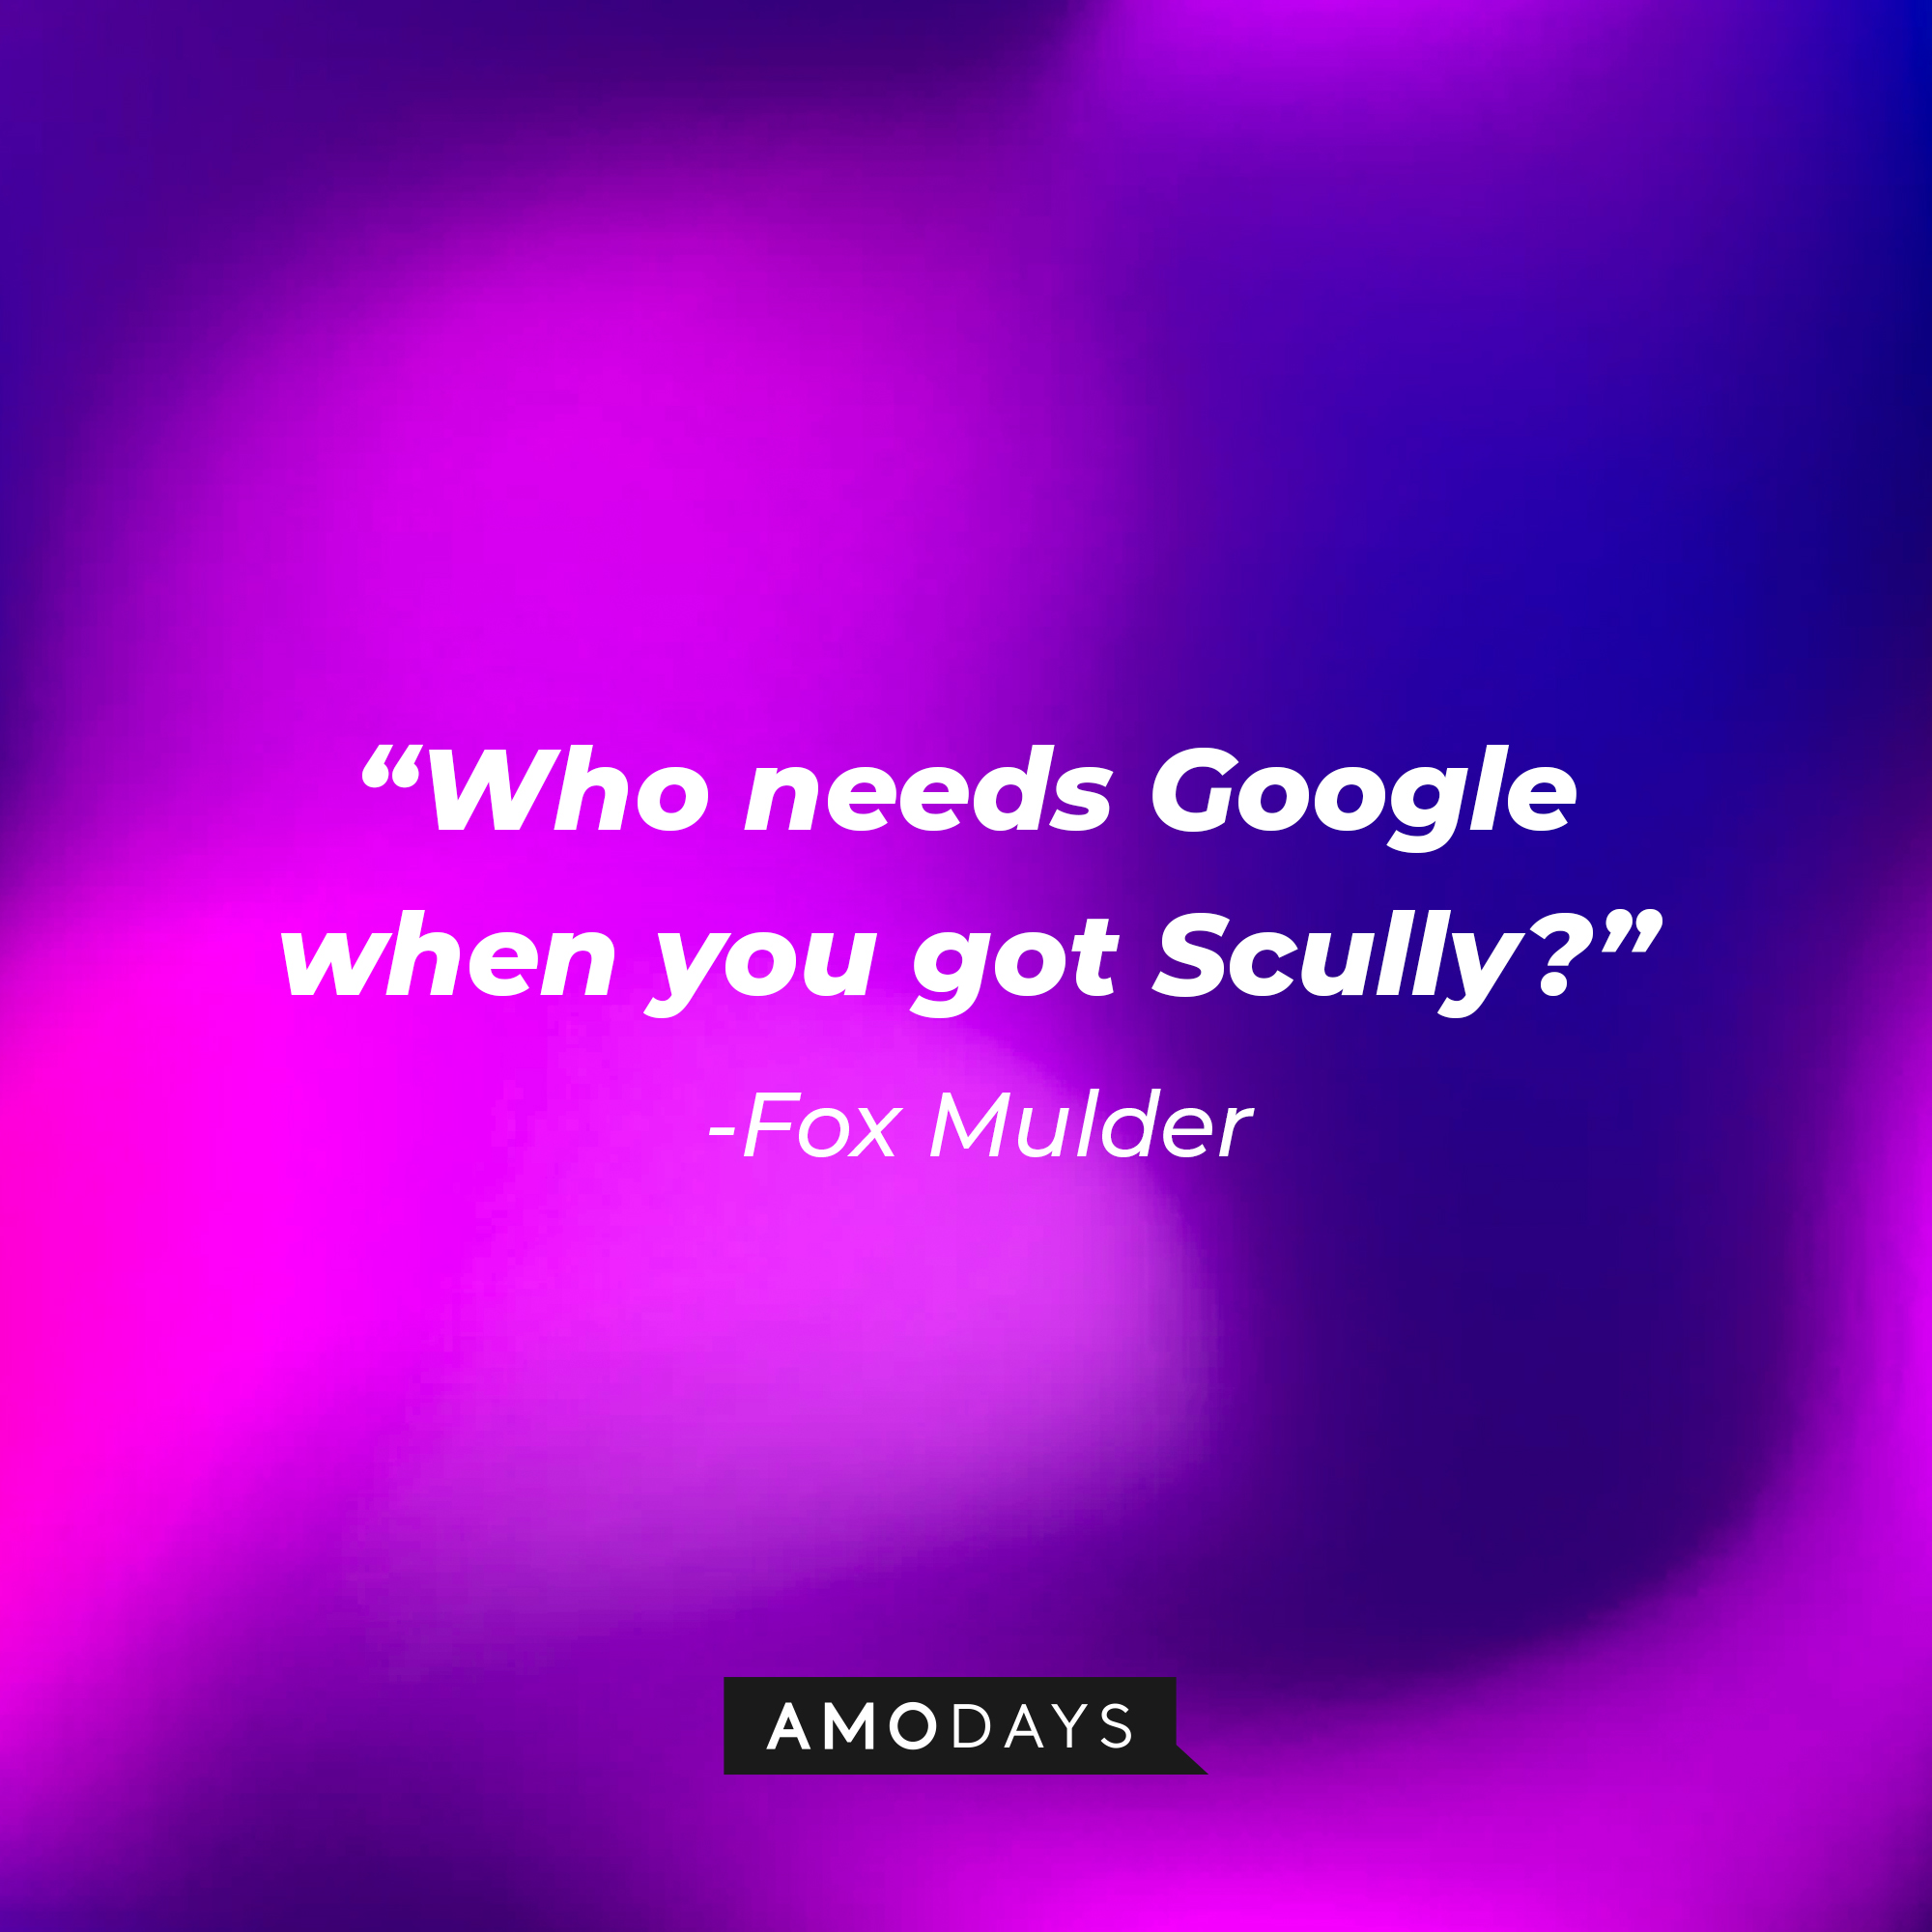 Fox Mulder's quote: "Who needs Google when you got Scully?" | Source: AmoDays